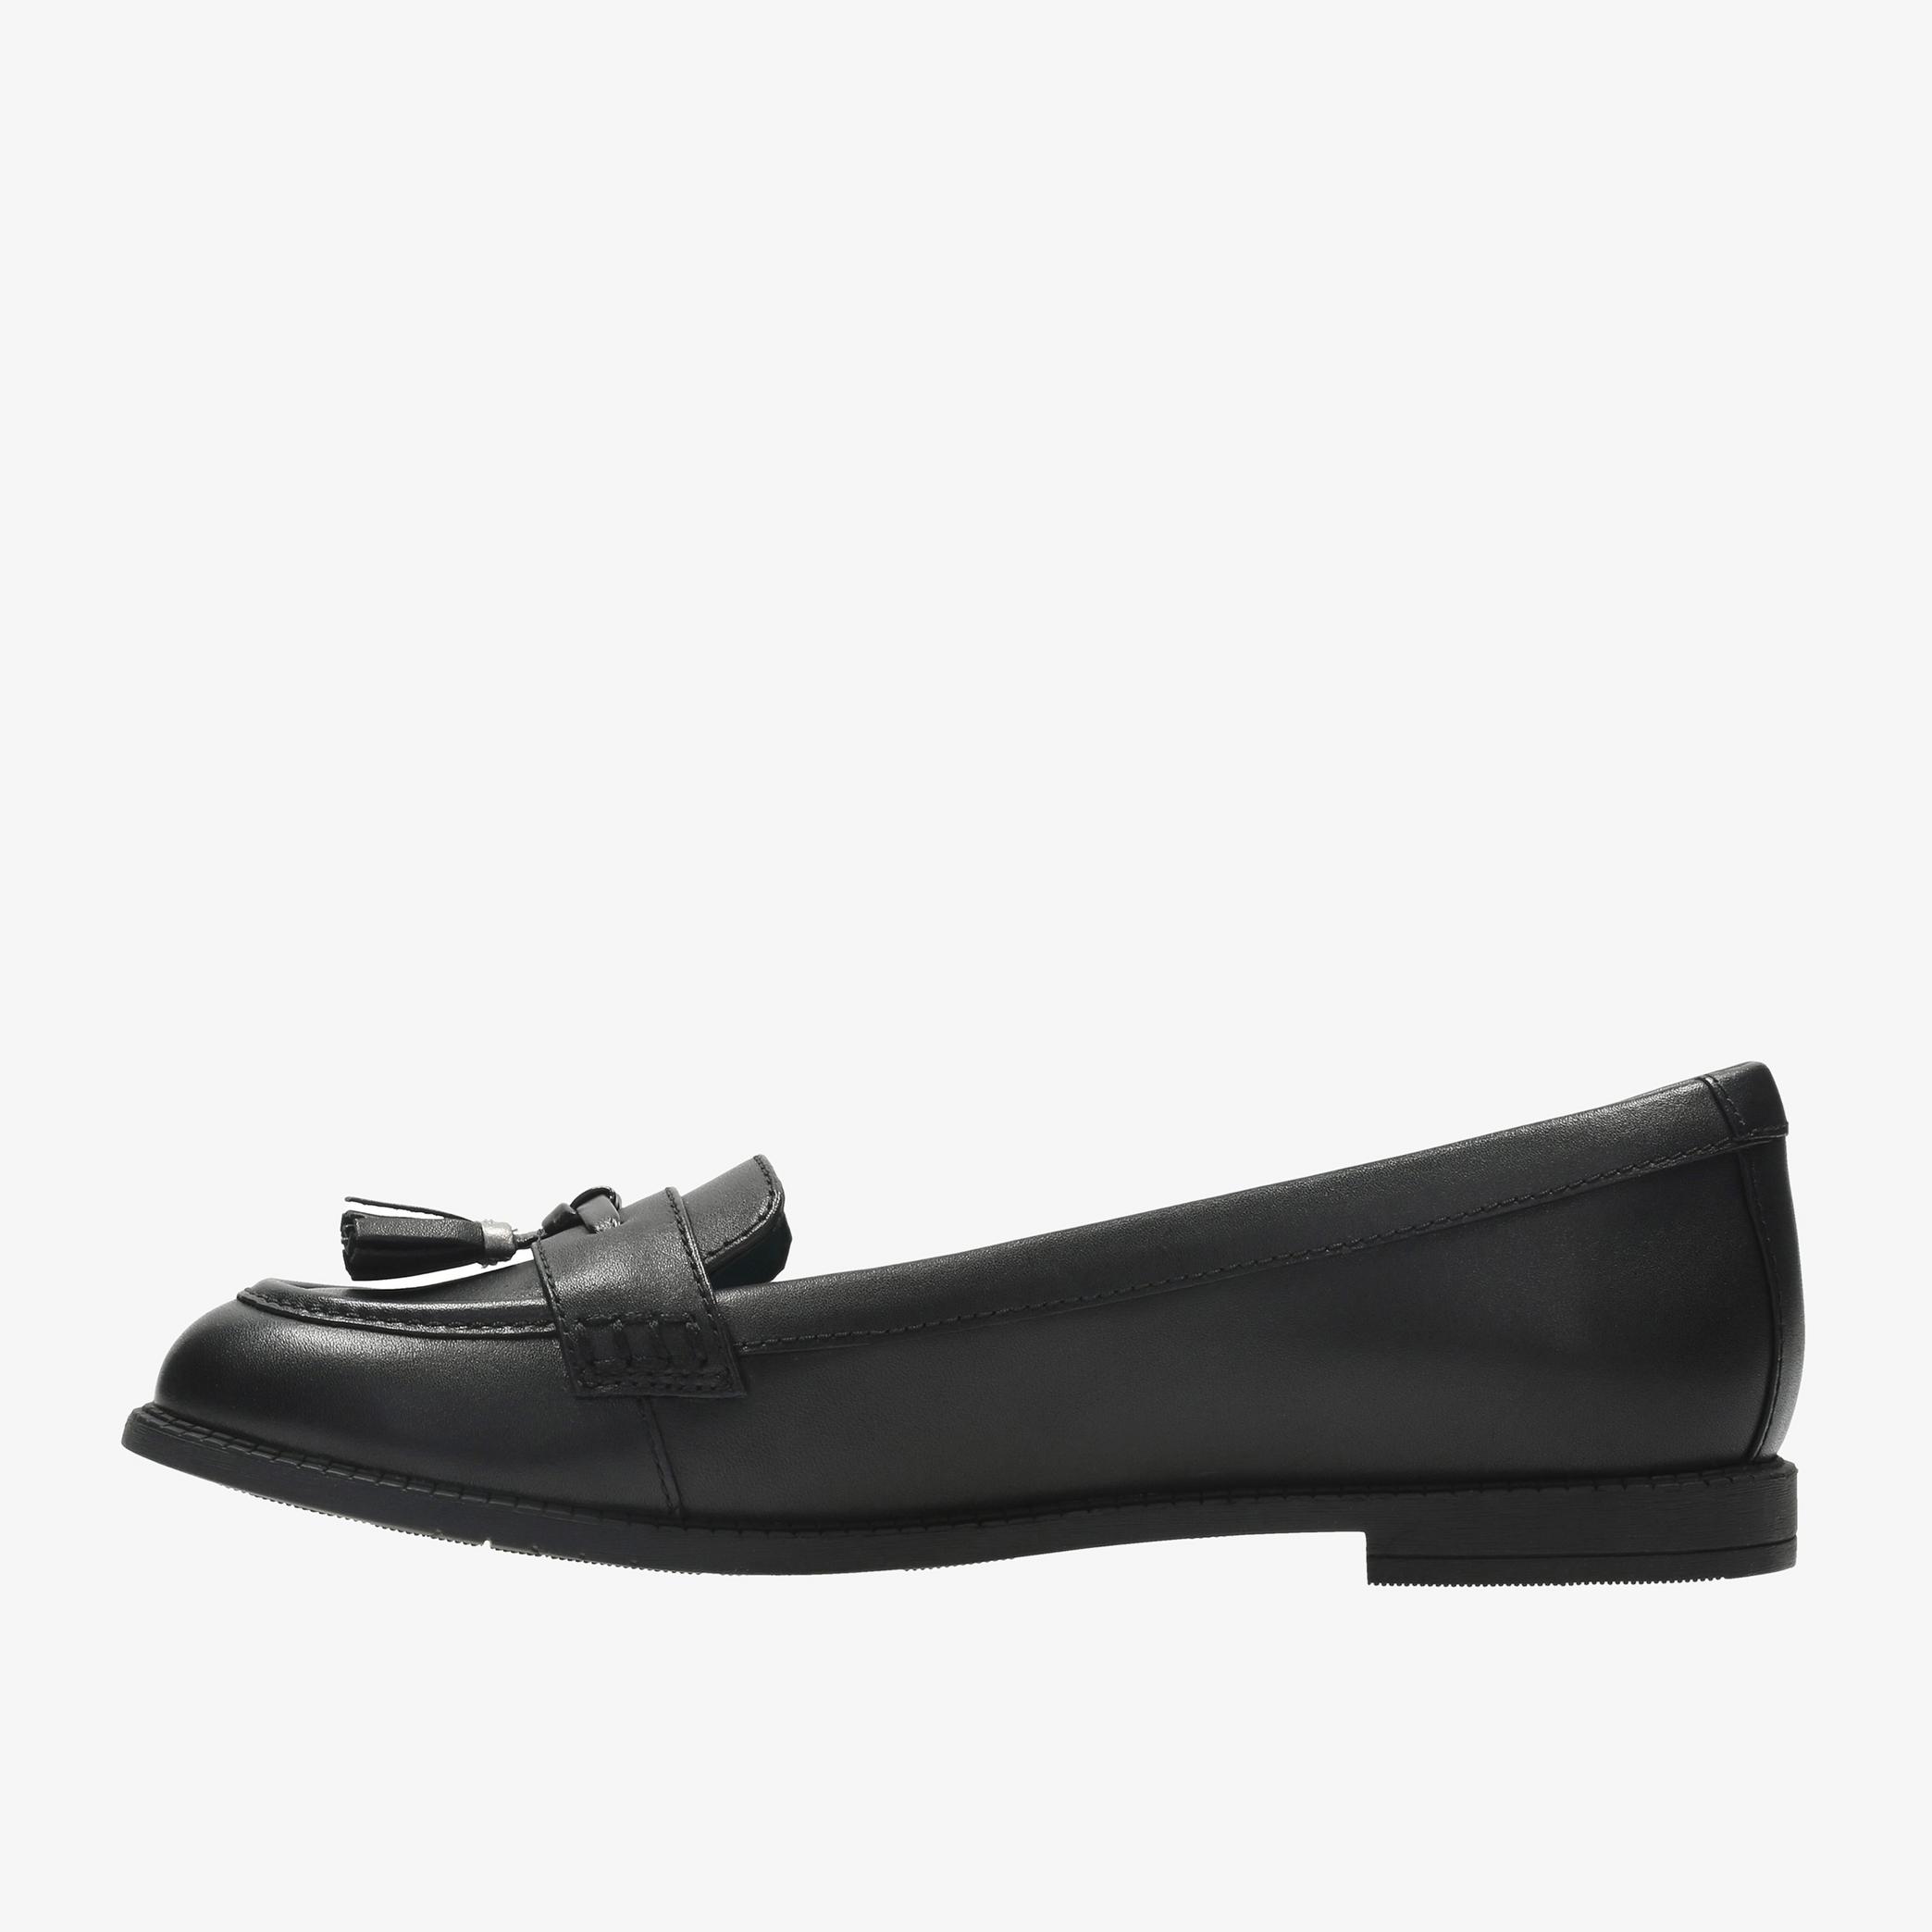 Preppy Edge Youth Black Leather Loafers, view 2 of 6